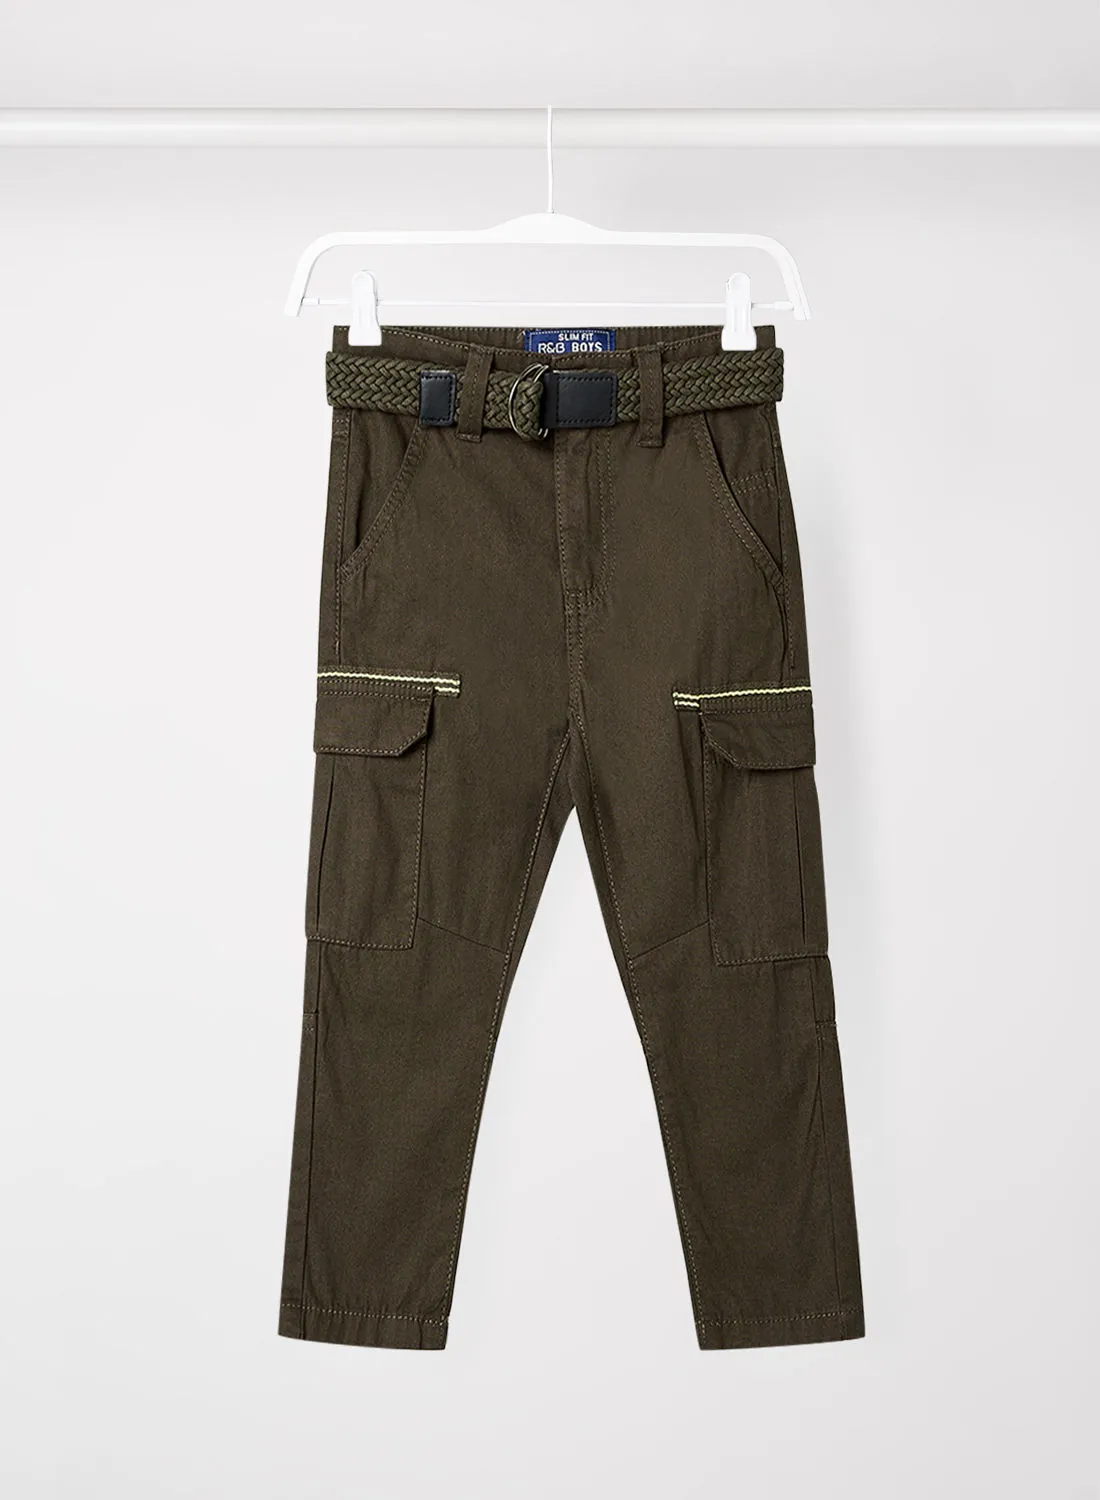 R&B Trendy Fashion Cotton Belted Trousers Dark Olive Green